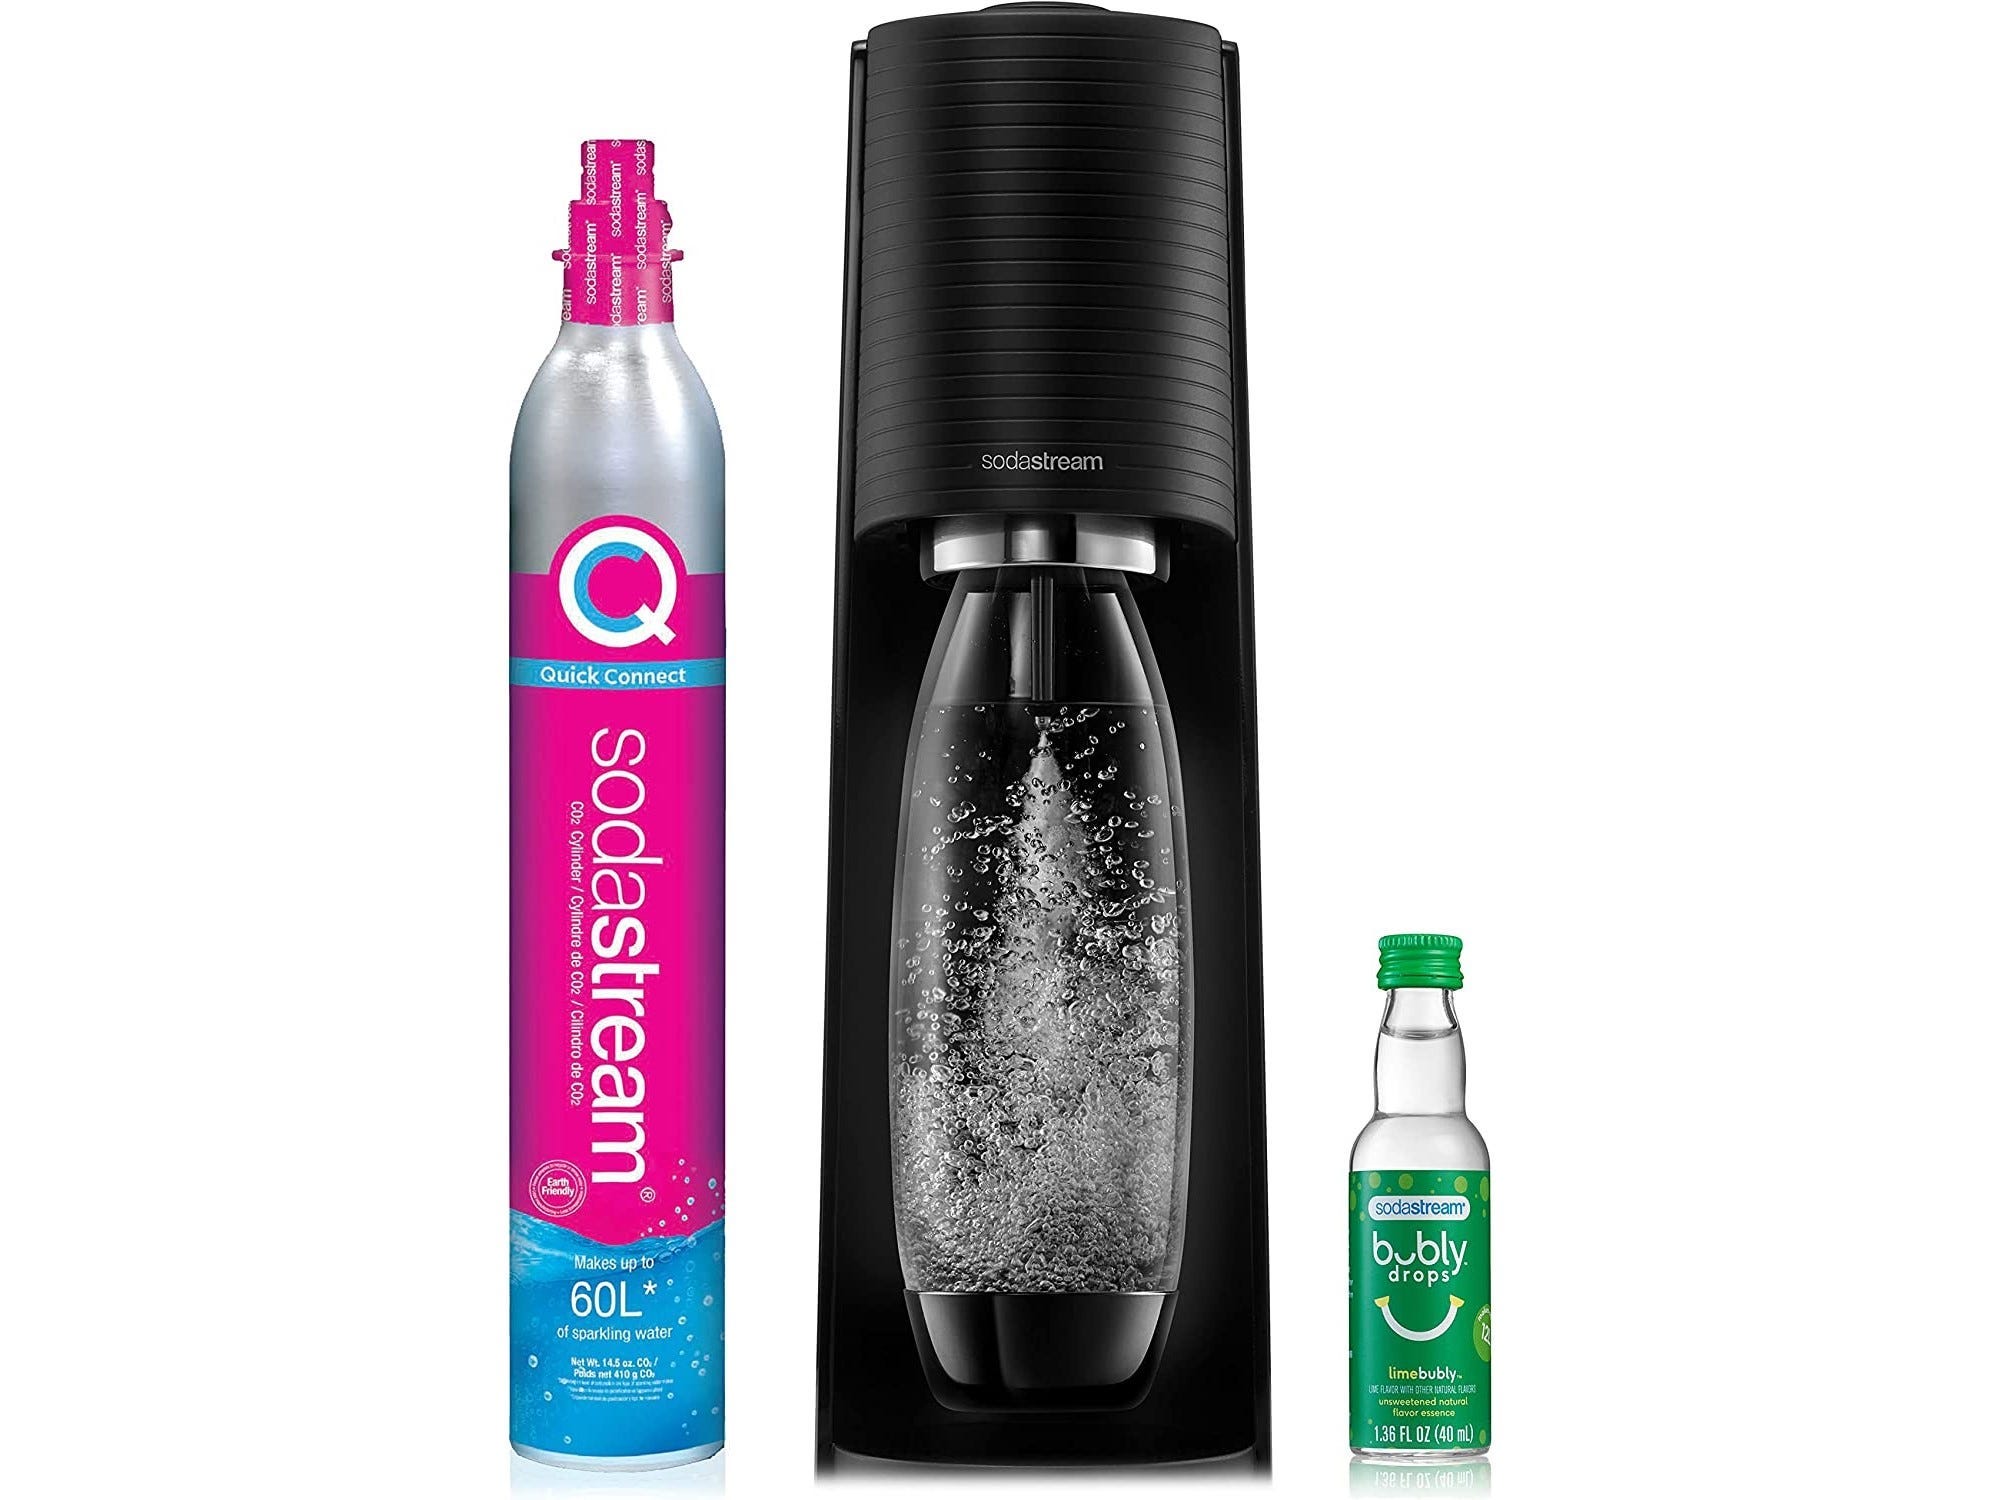 The SodaStream Terra Sparkling Water Maker is displayed next to SodaSteram Bubly Drops and a CO2 cartridge.